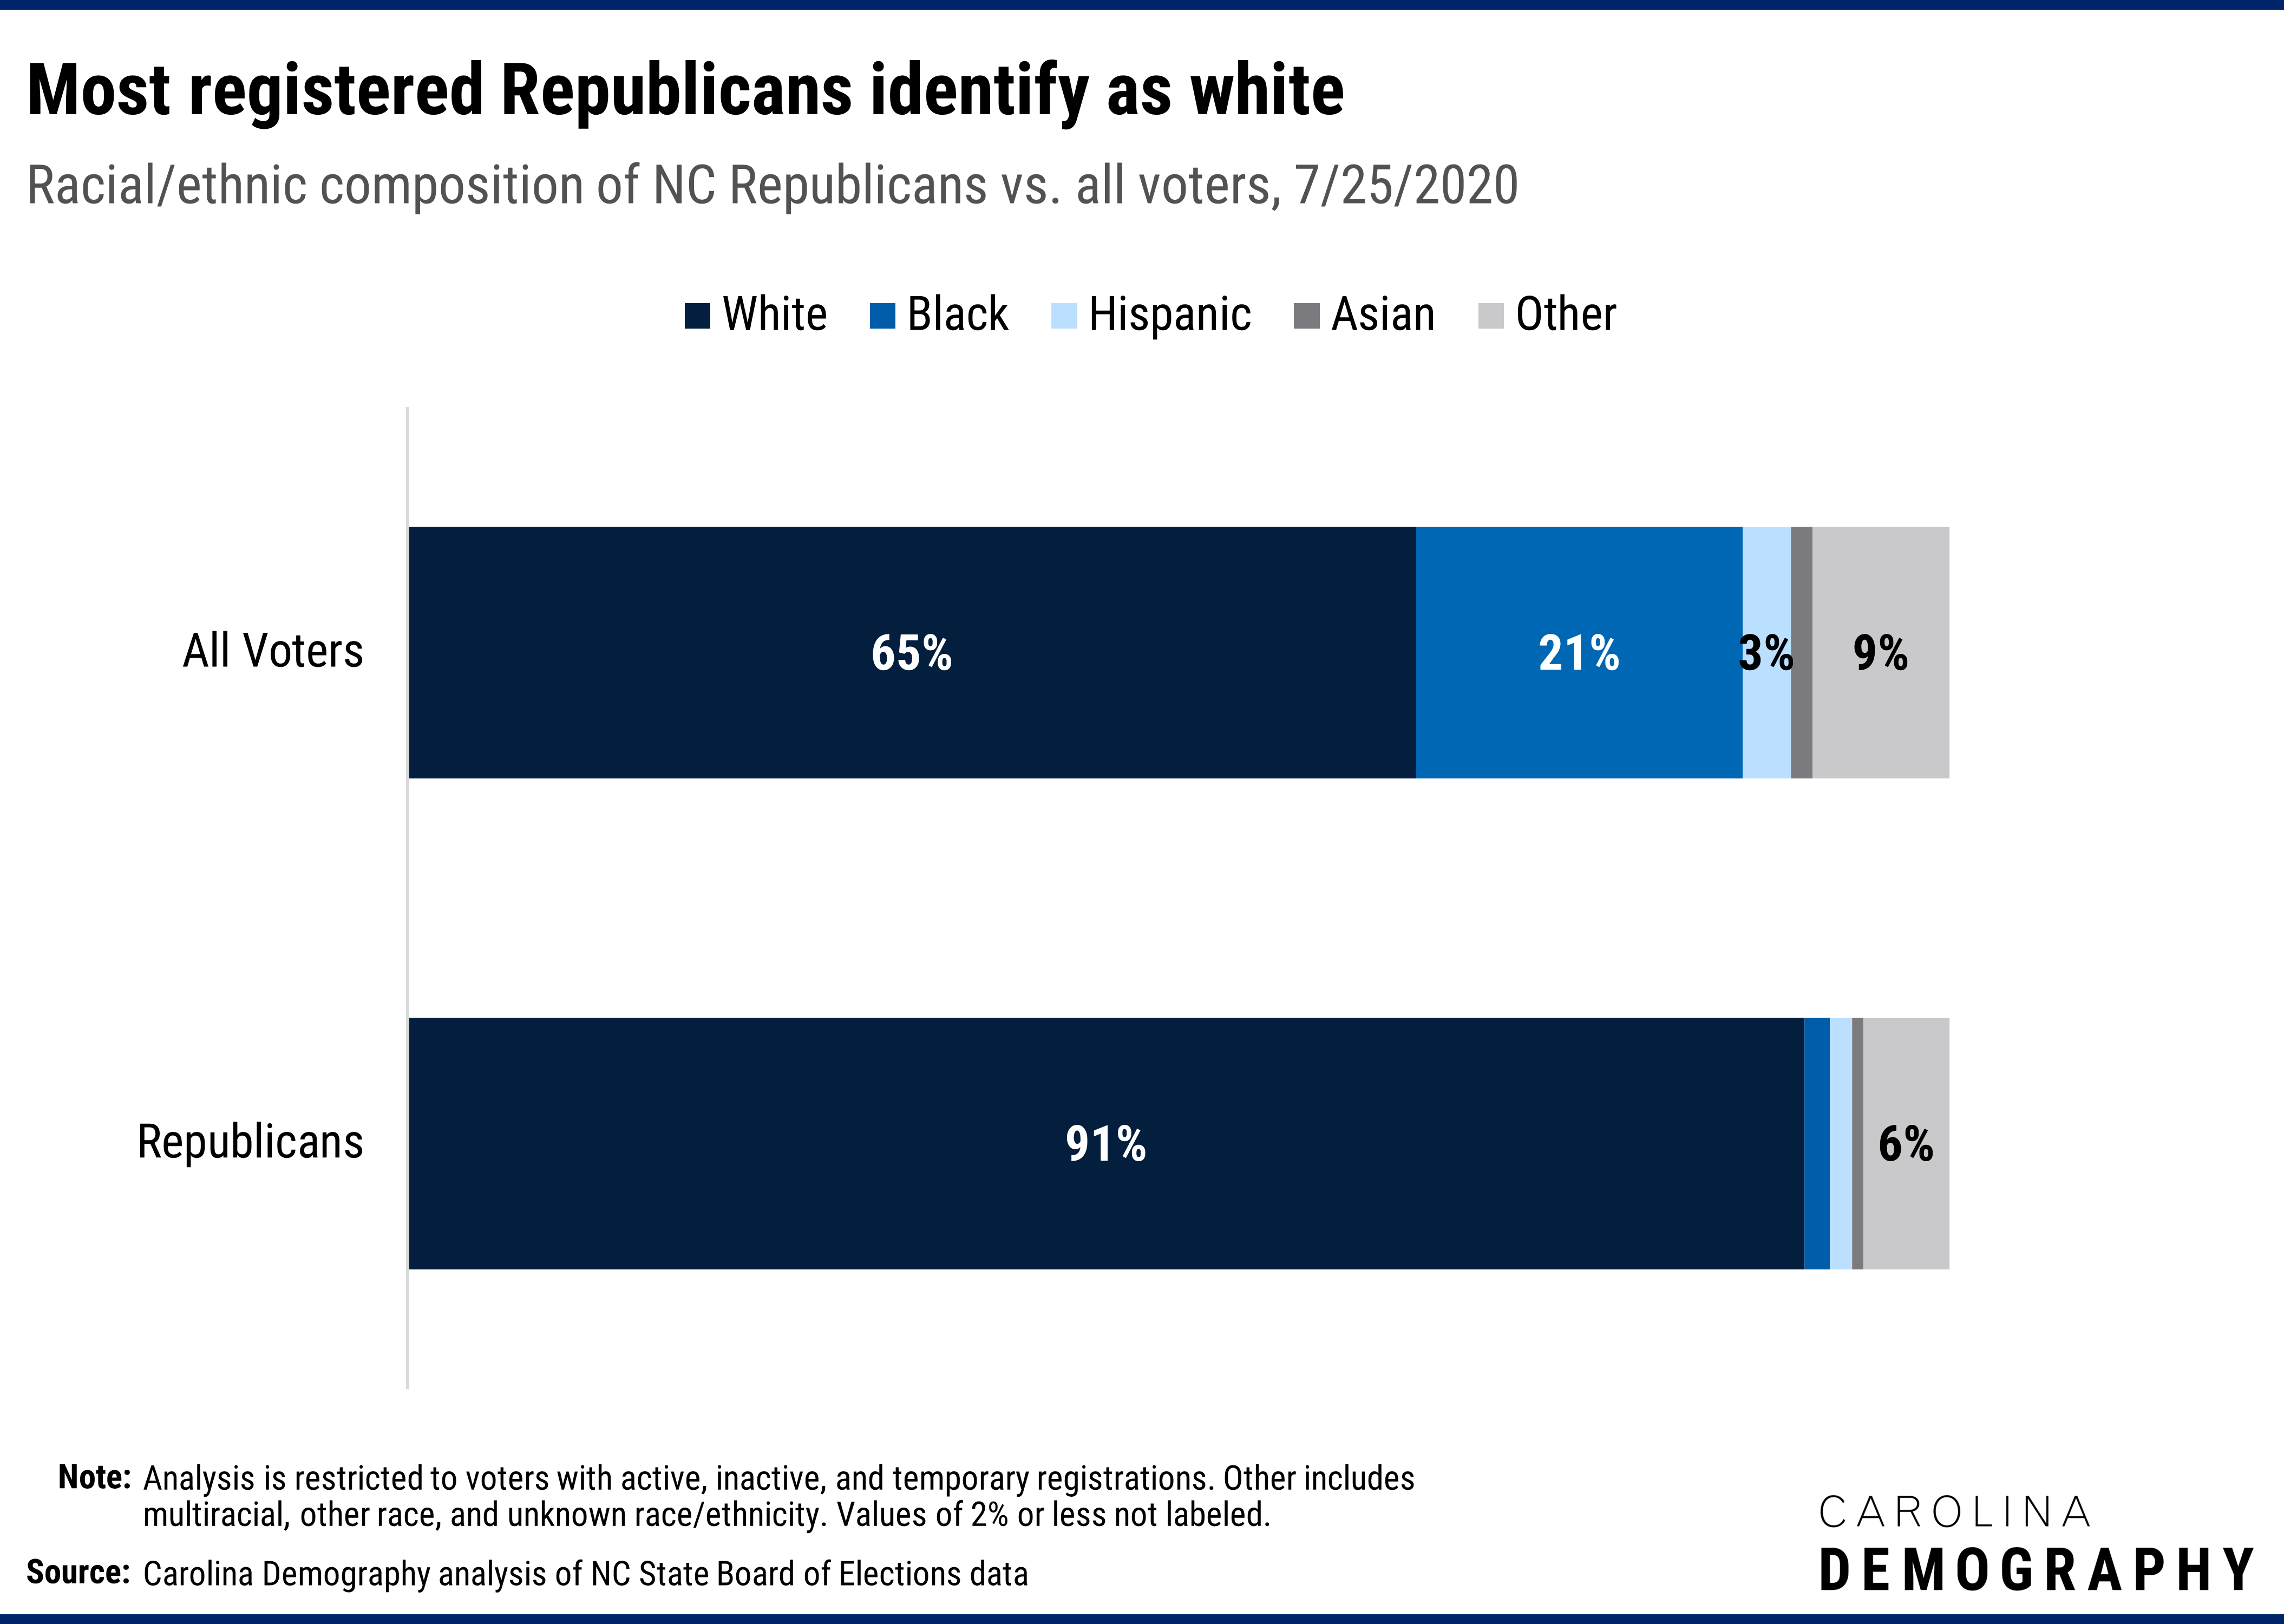 Most registered Republicans identify as white Racial/ethnic composition of NC Republicans vs. all voters, 7/25/2020. North Carolina’s registered Republicans are overwhelmingly white. Ninety-two percent of Republican voters are white compared to 67% of the electorate overall. 